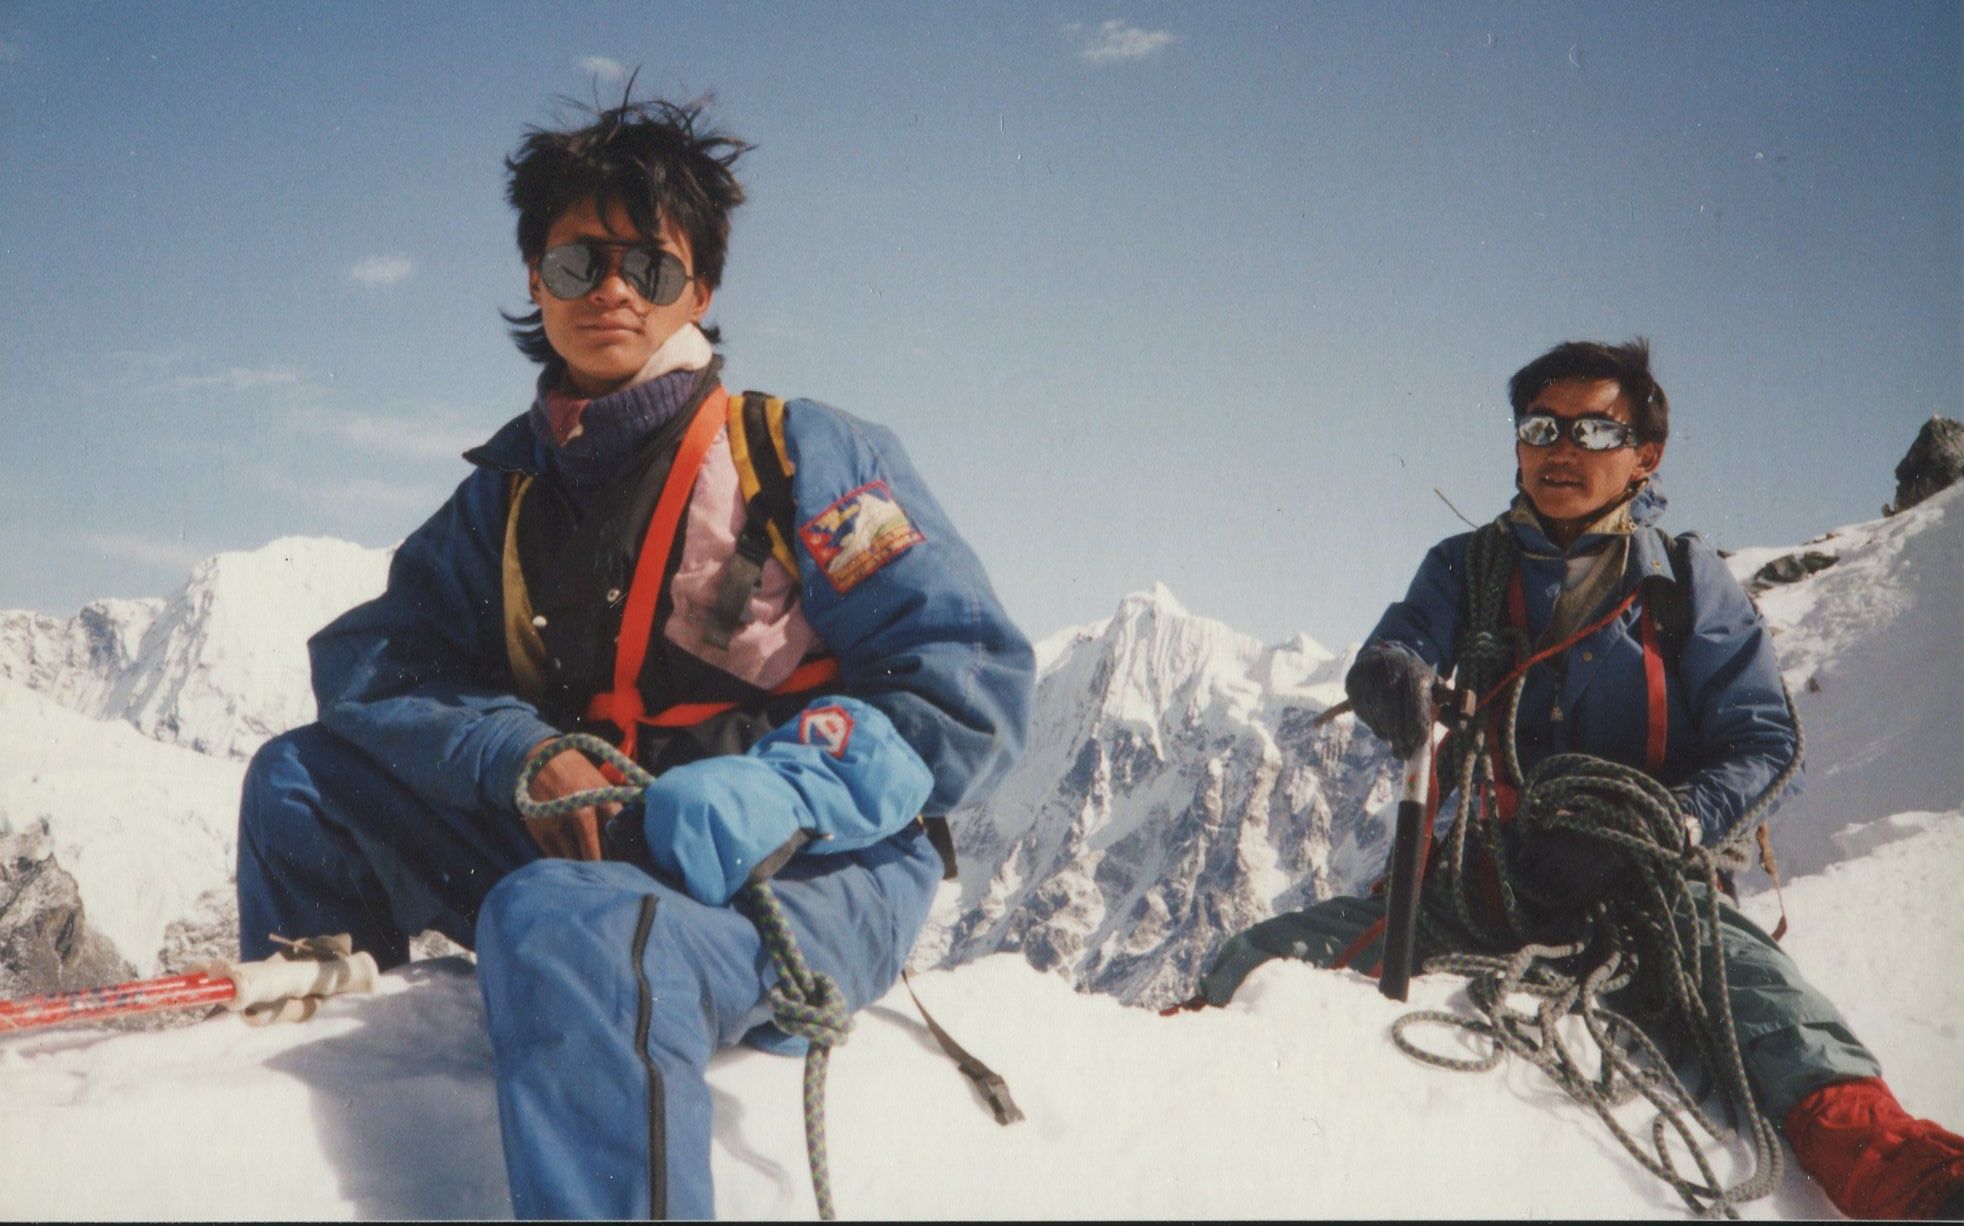 Sherpas on the summit arete of Yala Peak in the Langtang Valley